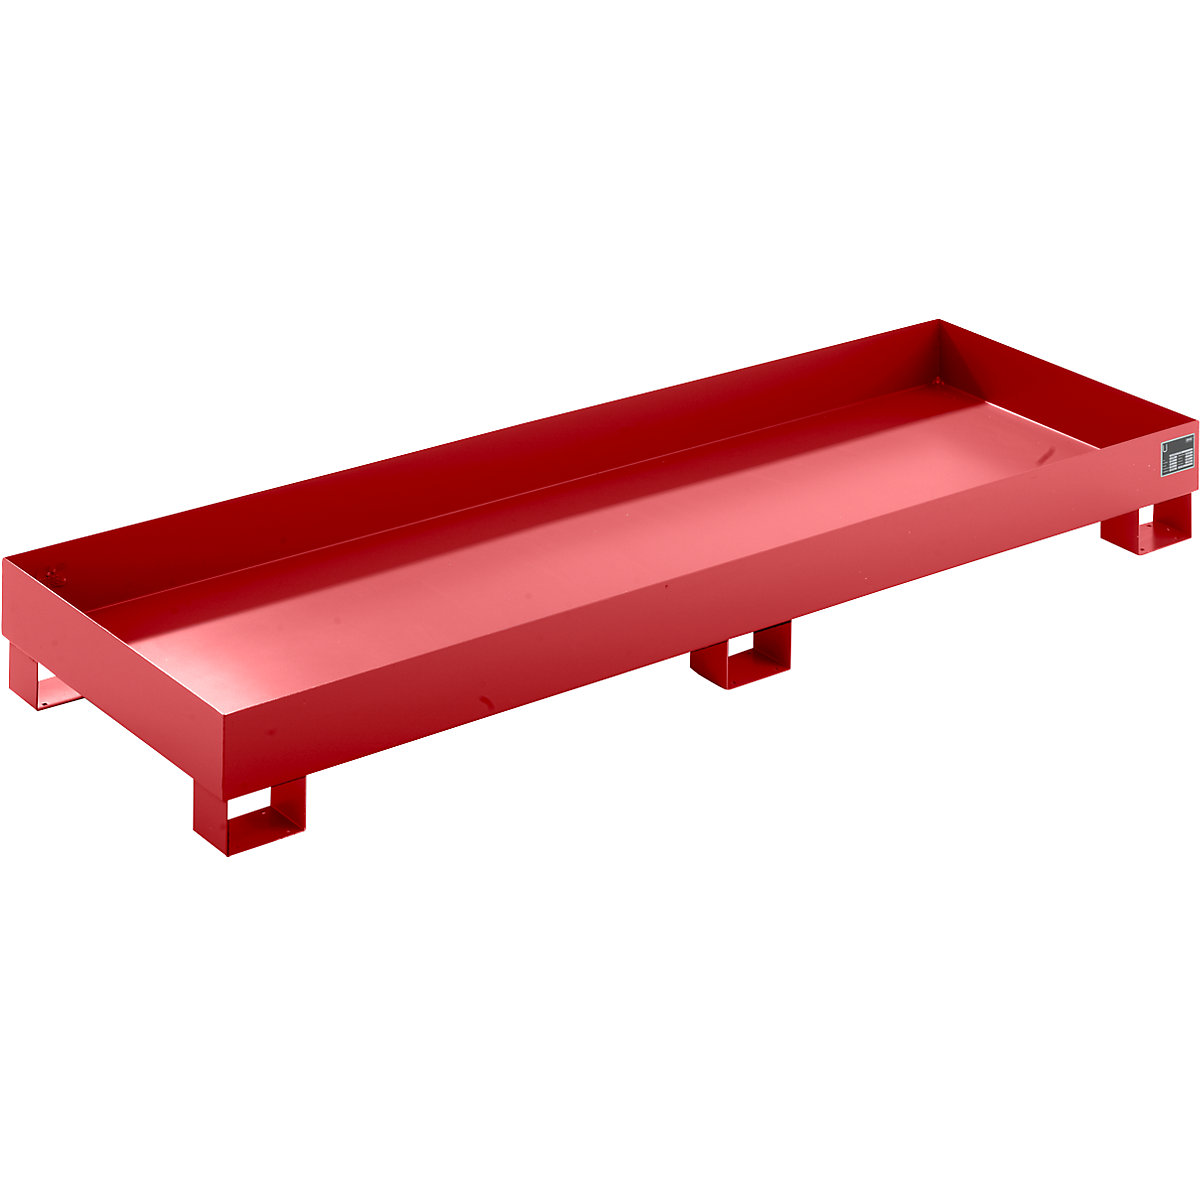 EUROKRAFTbasic – Sump tray made from sheet steel, LxWxH 2400 x 800 x 250 mm, red RAL 3000